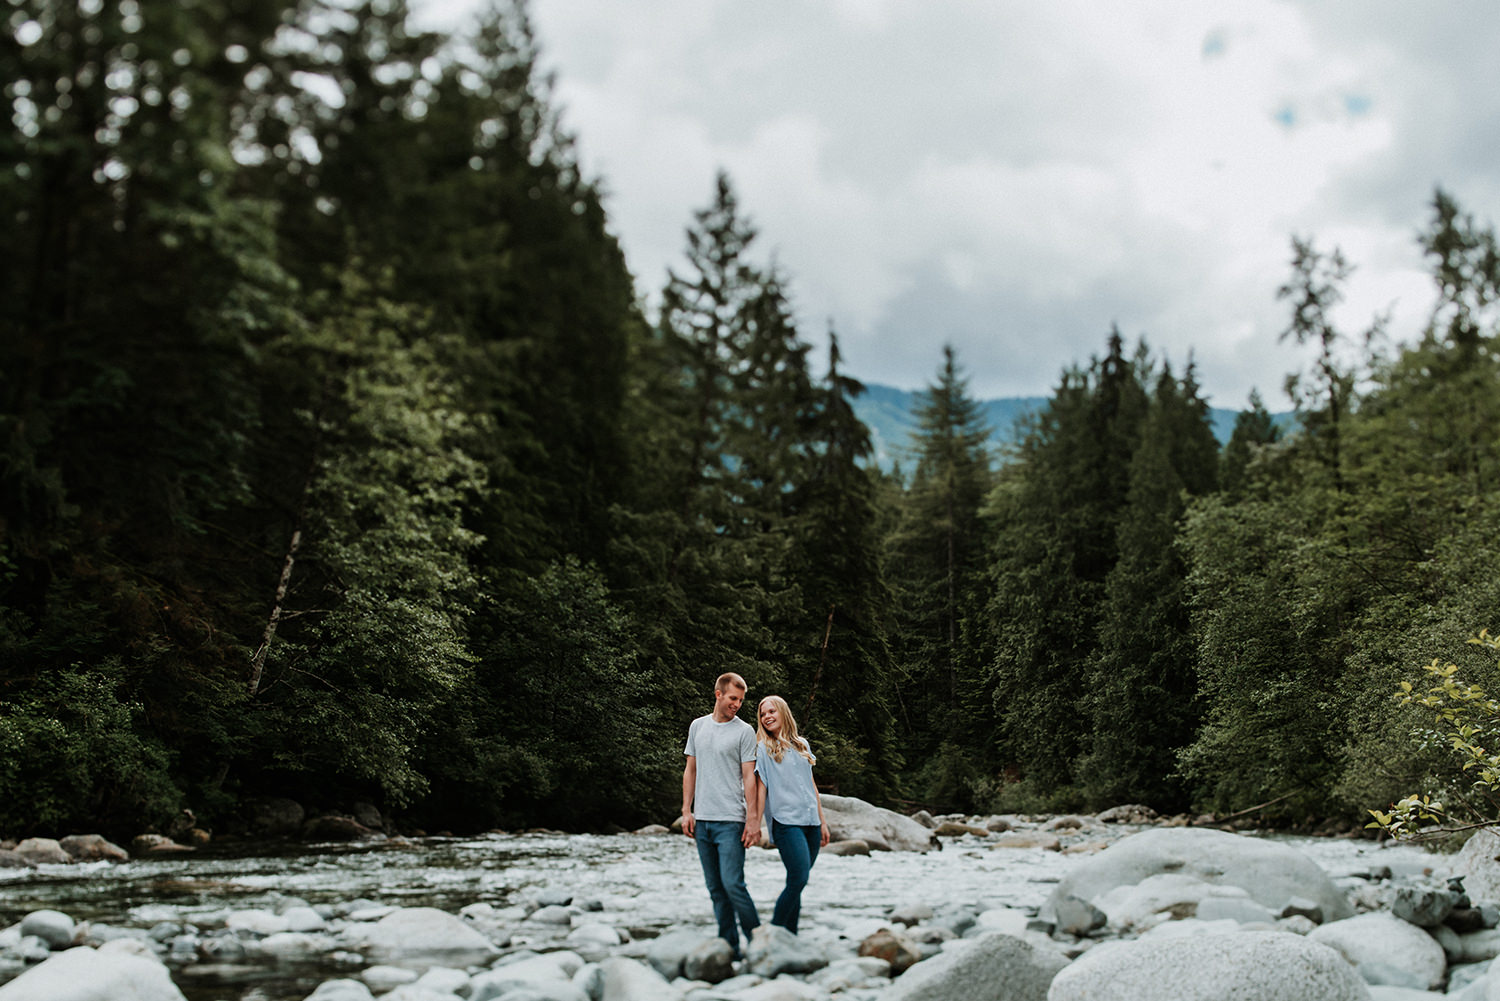 Vancouver Elopement Photography Locations